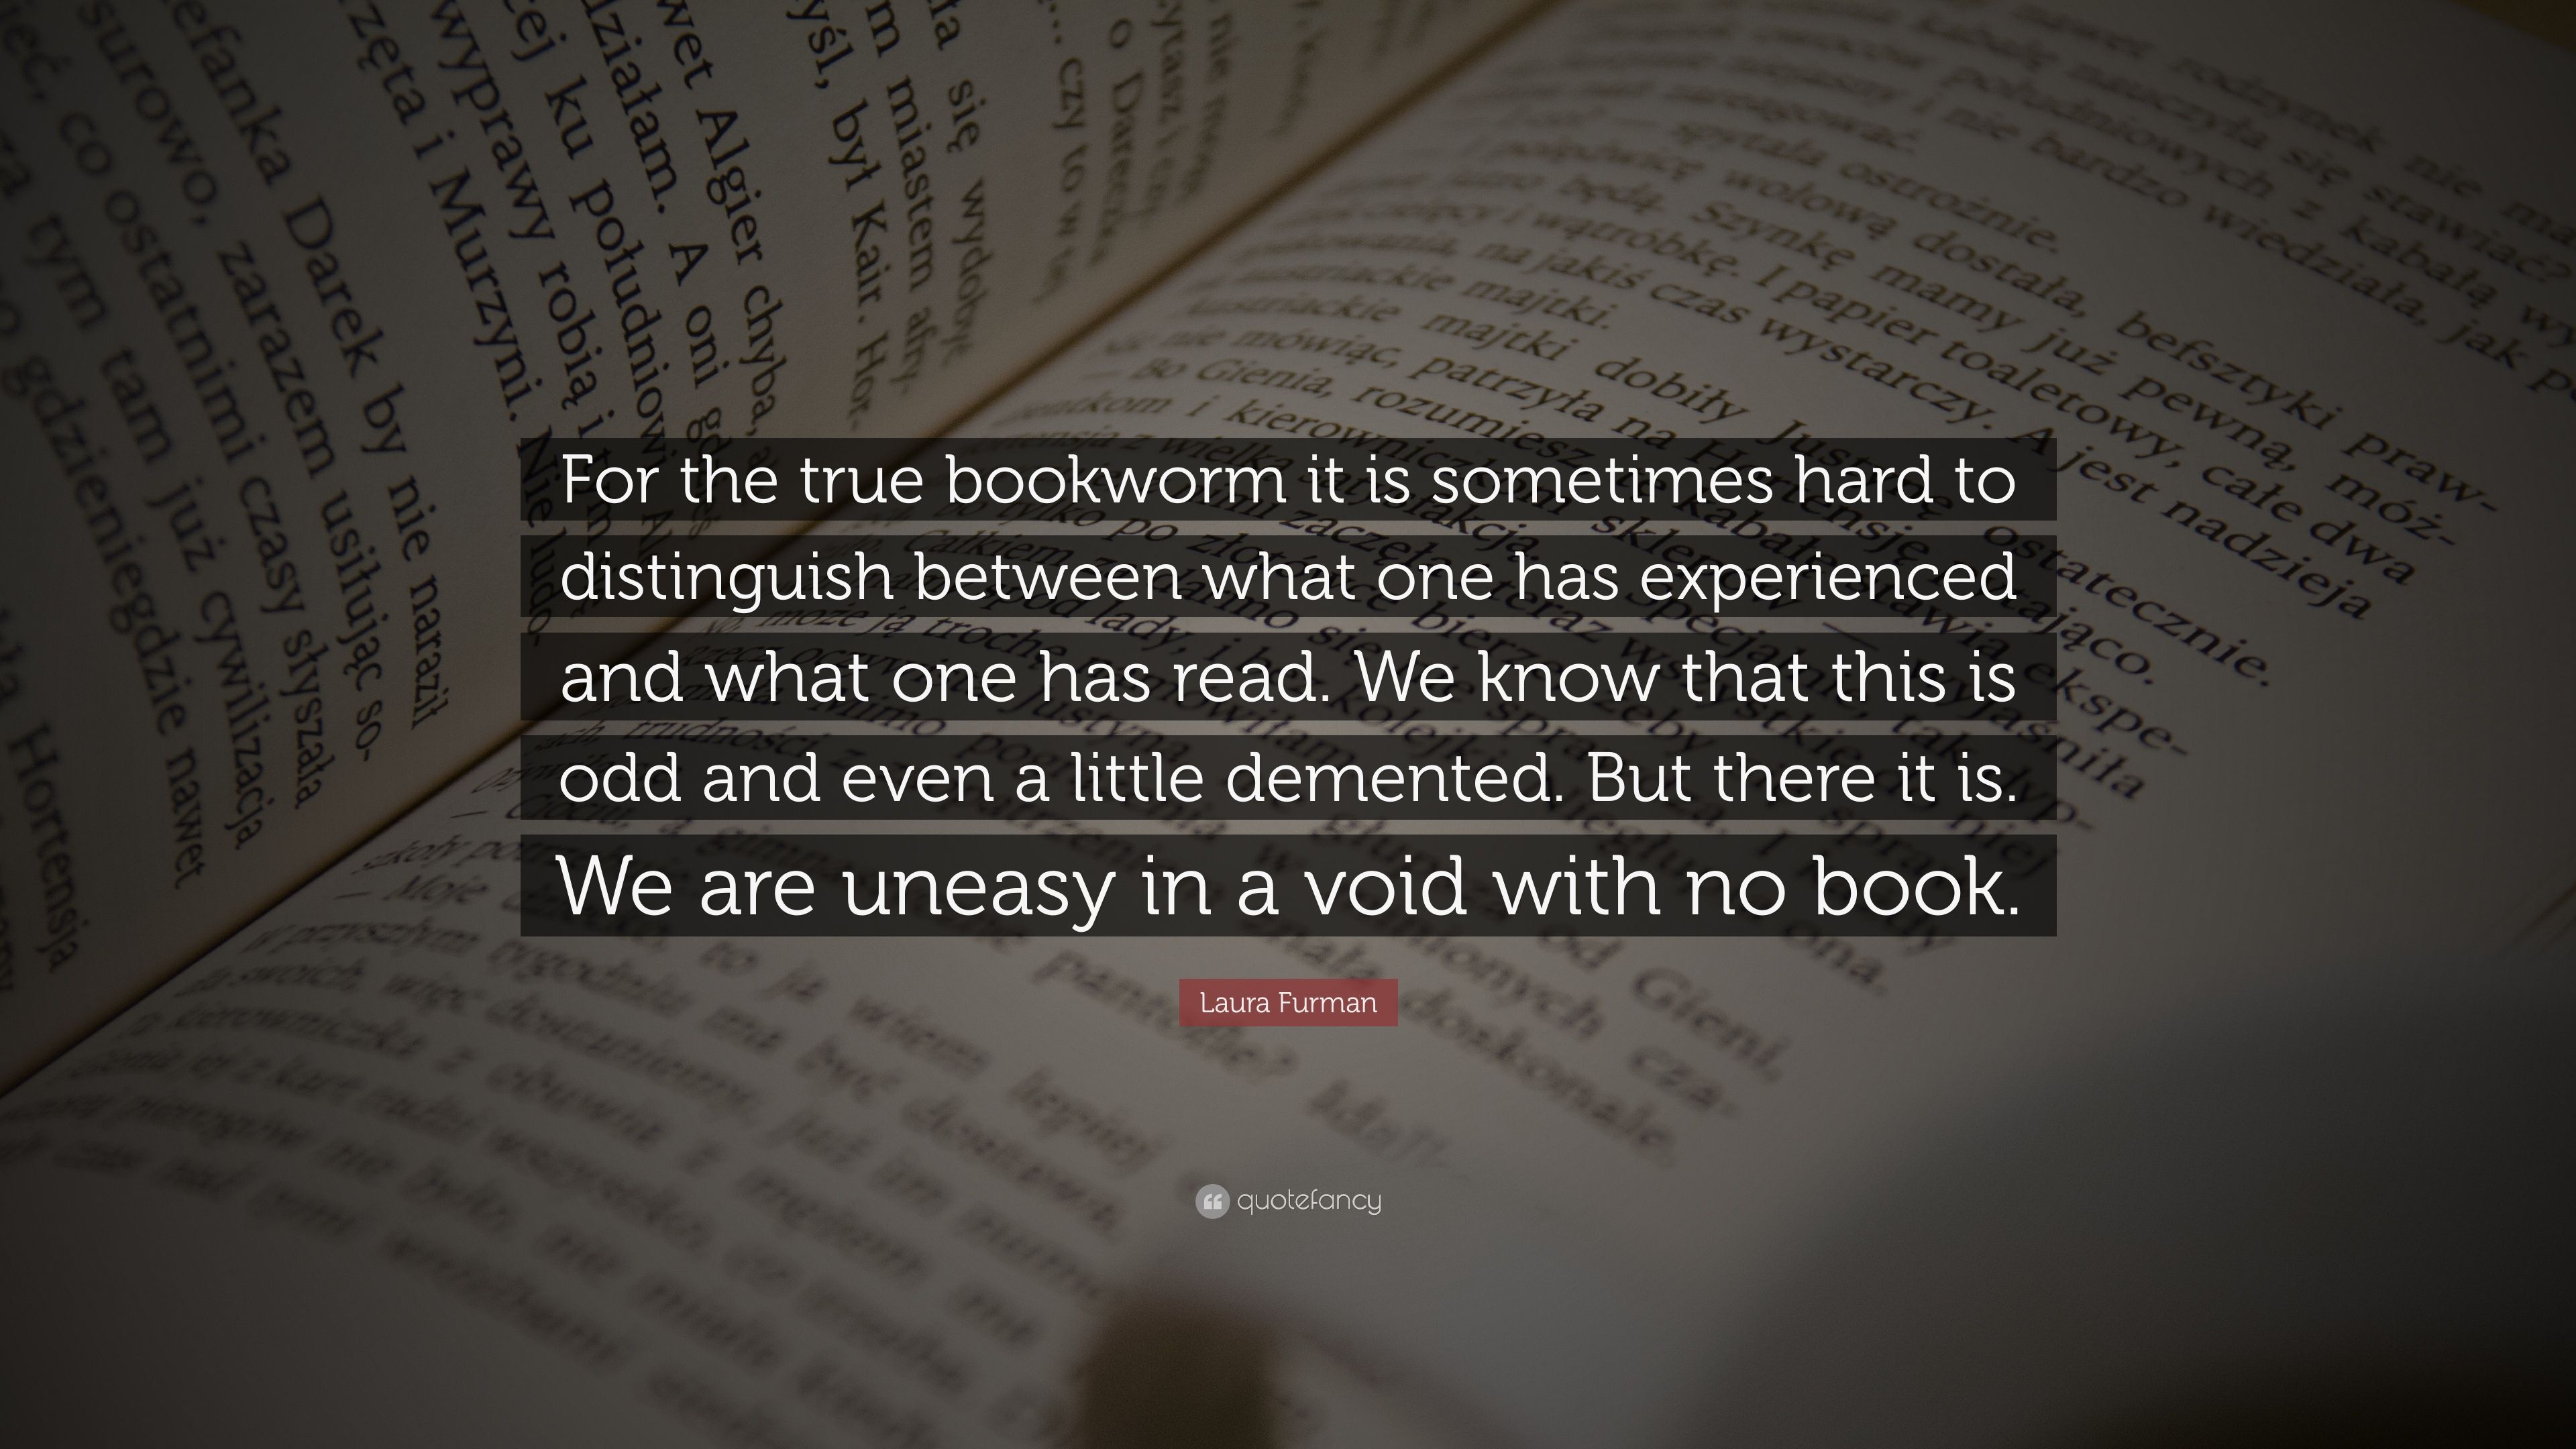 Laura Furman Quote: “For the true bookworm it is sometimes hard to distinguish between what one has experienced and what one has read. We kno.” (7 wallpaper)